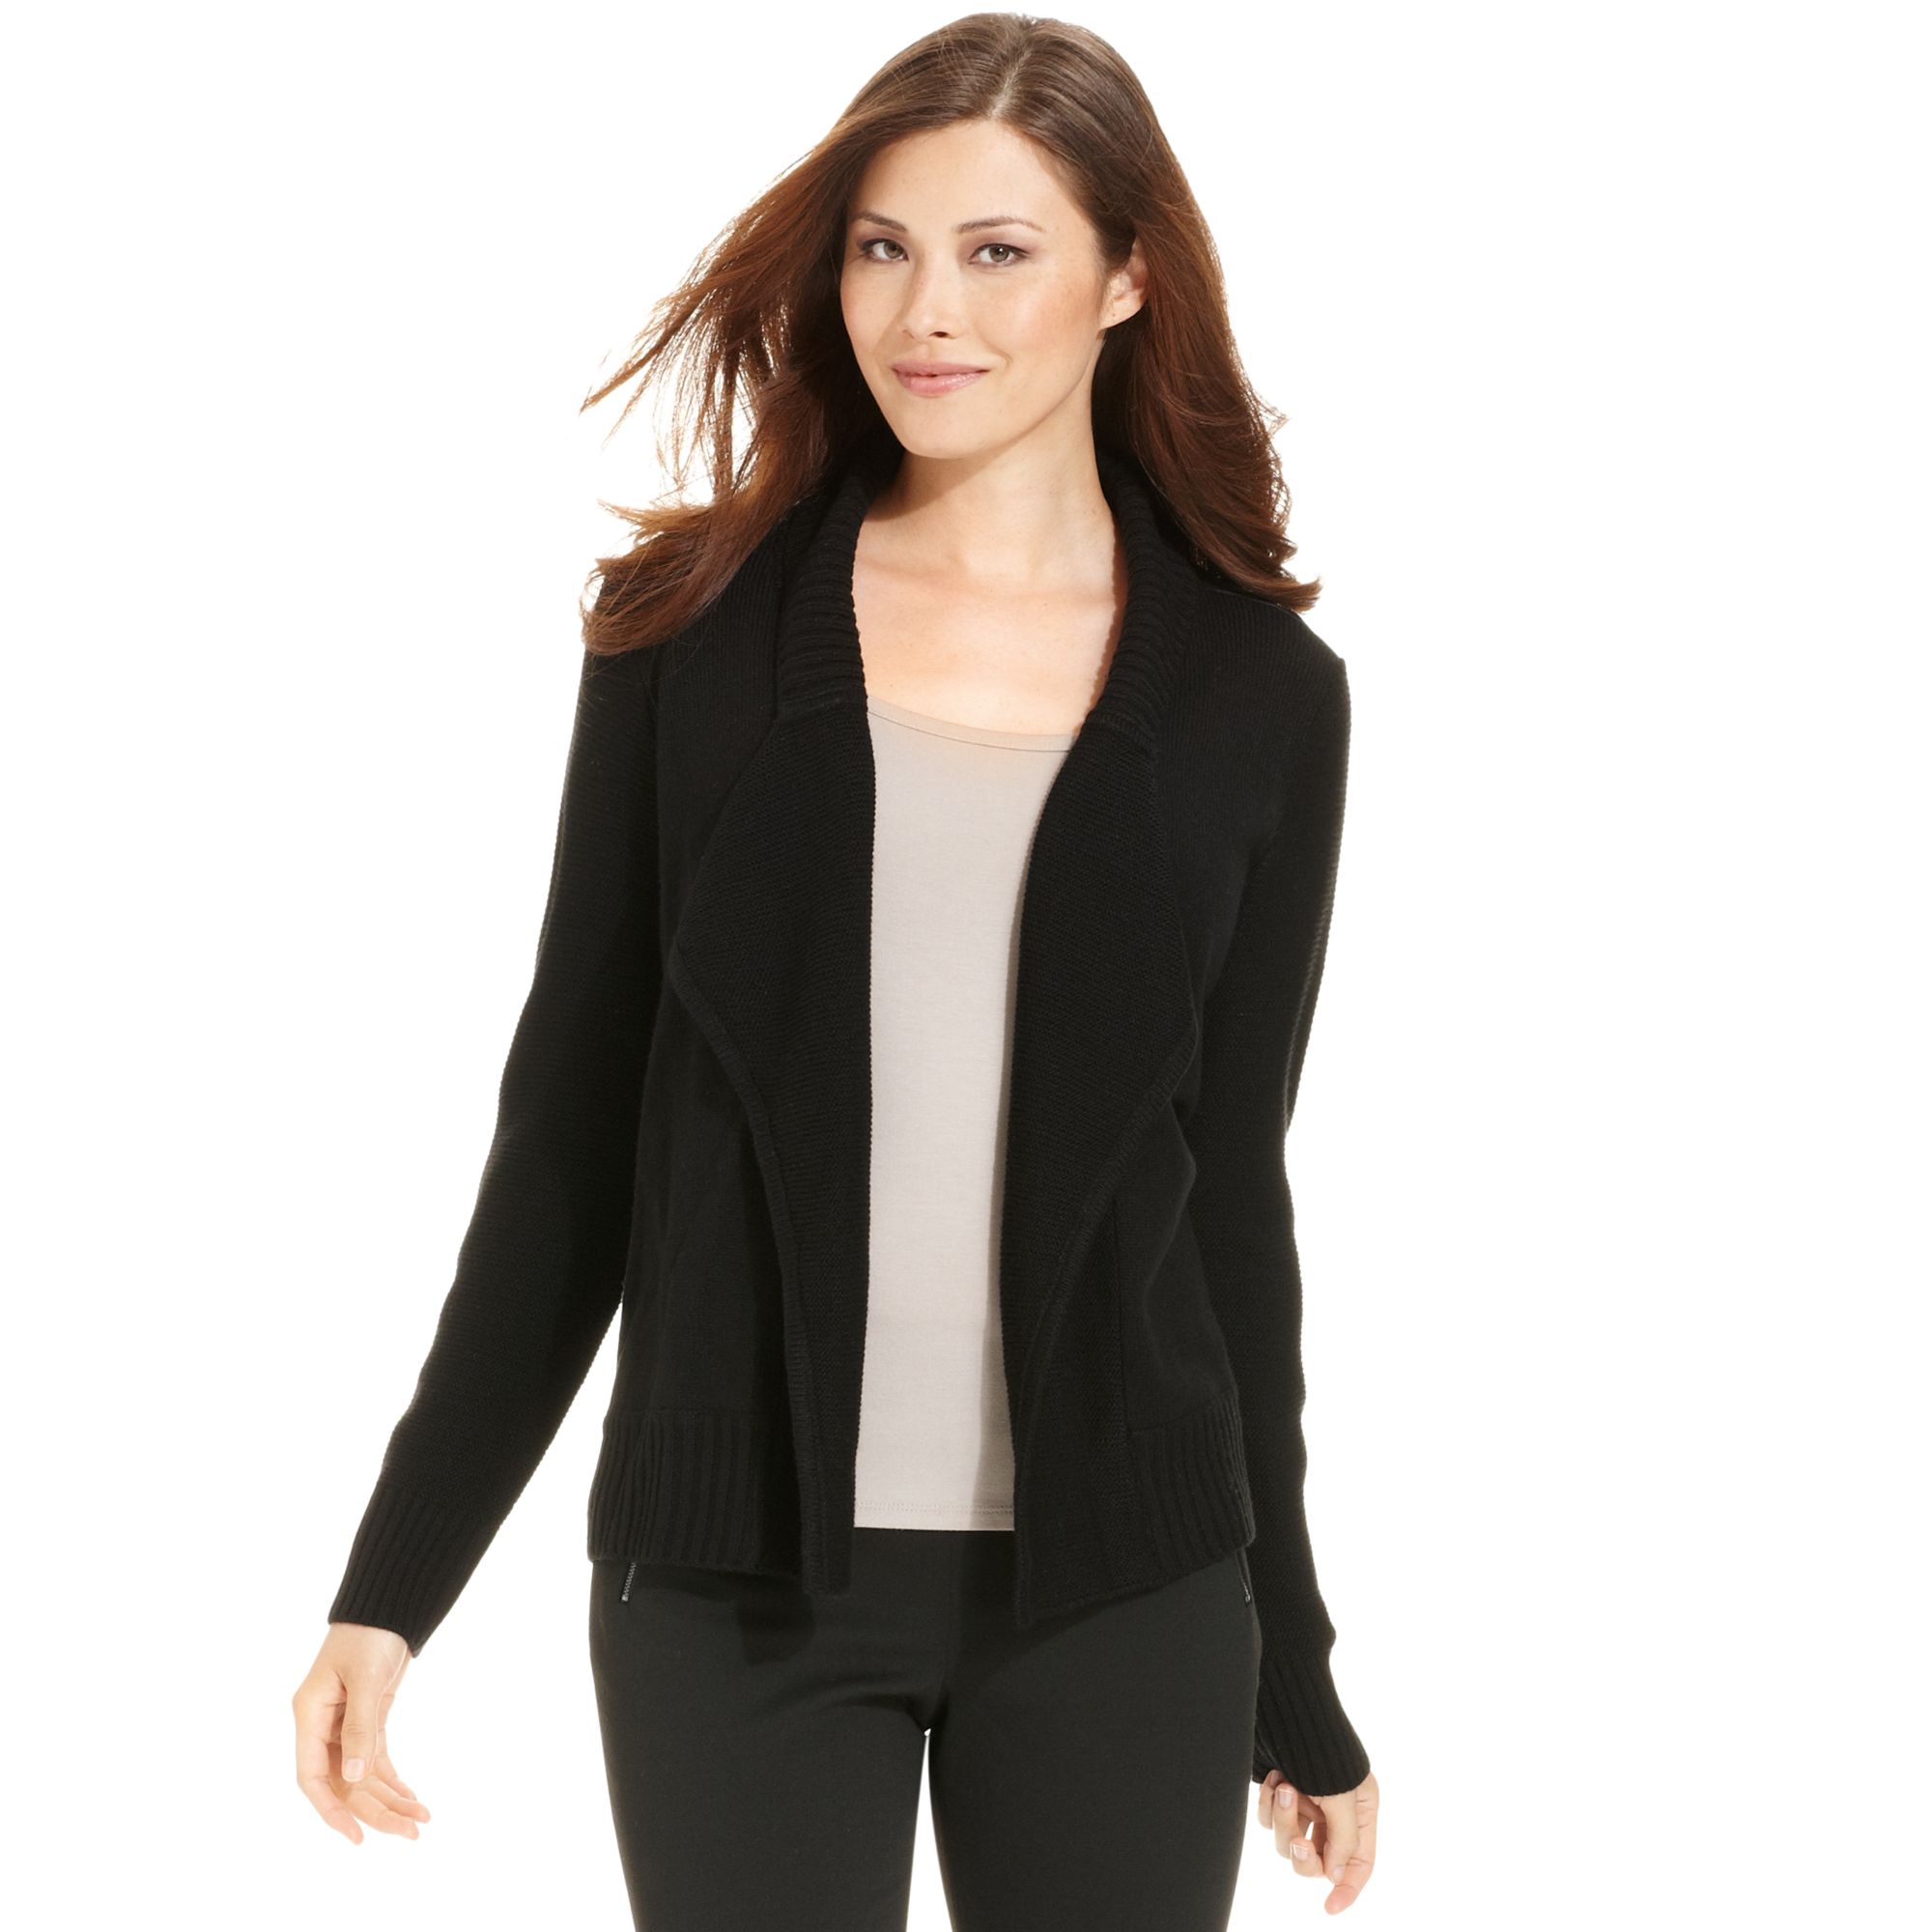 Lyst - Ellen tracy Long sleeve Pleather Ribbed Openfront Cardigan in Black